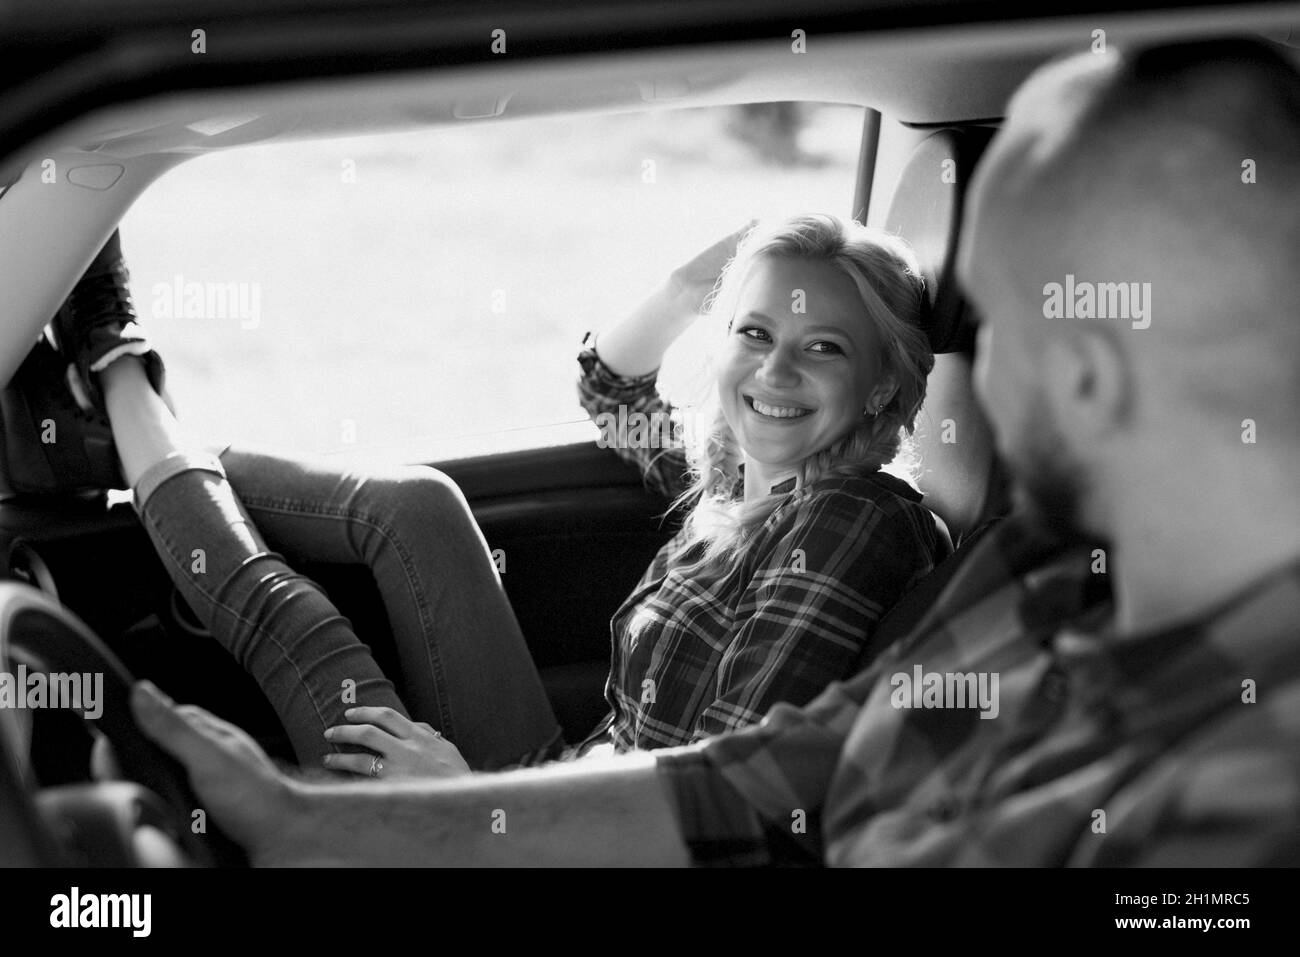 traveling by car of a young couple of a guy and a girl in plaid shirts Stock Photo